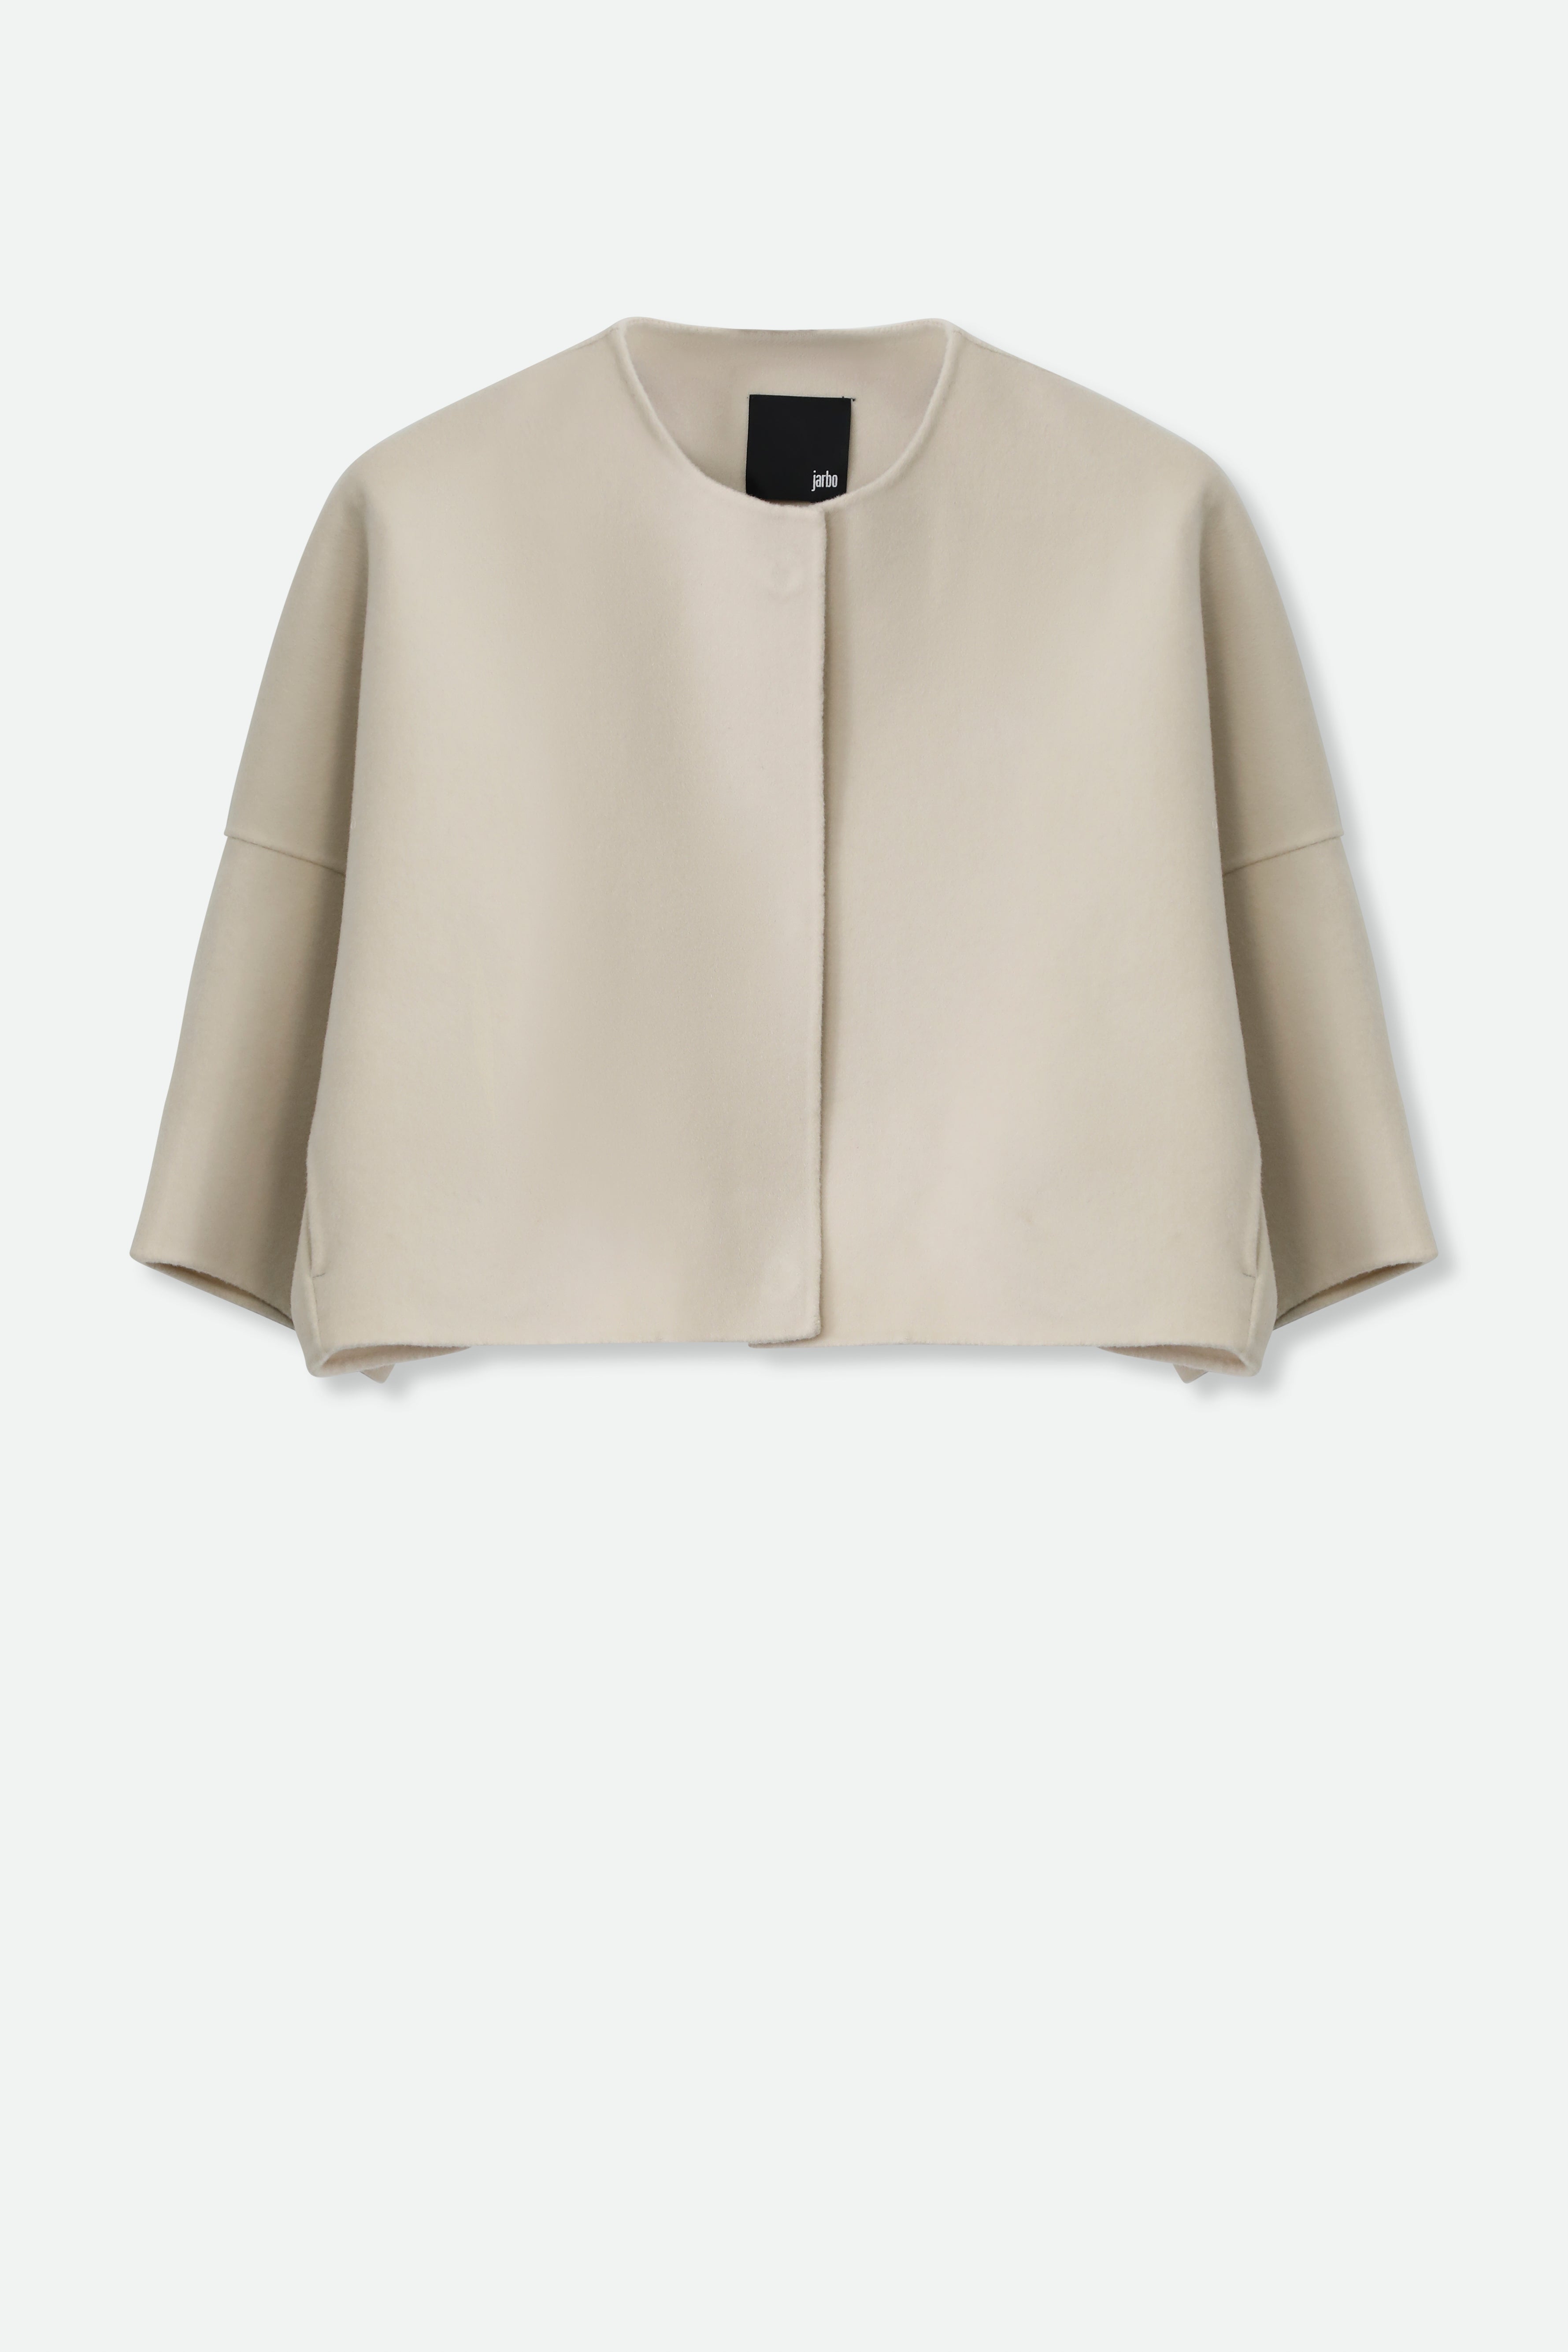 ADELAIDE SHORT SNAP JACKET IN DOUBLE-FACE CASHMERE WOOL - Jarbo